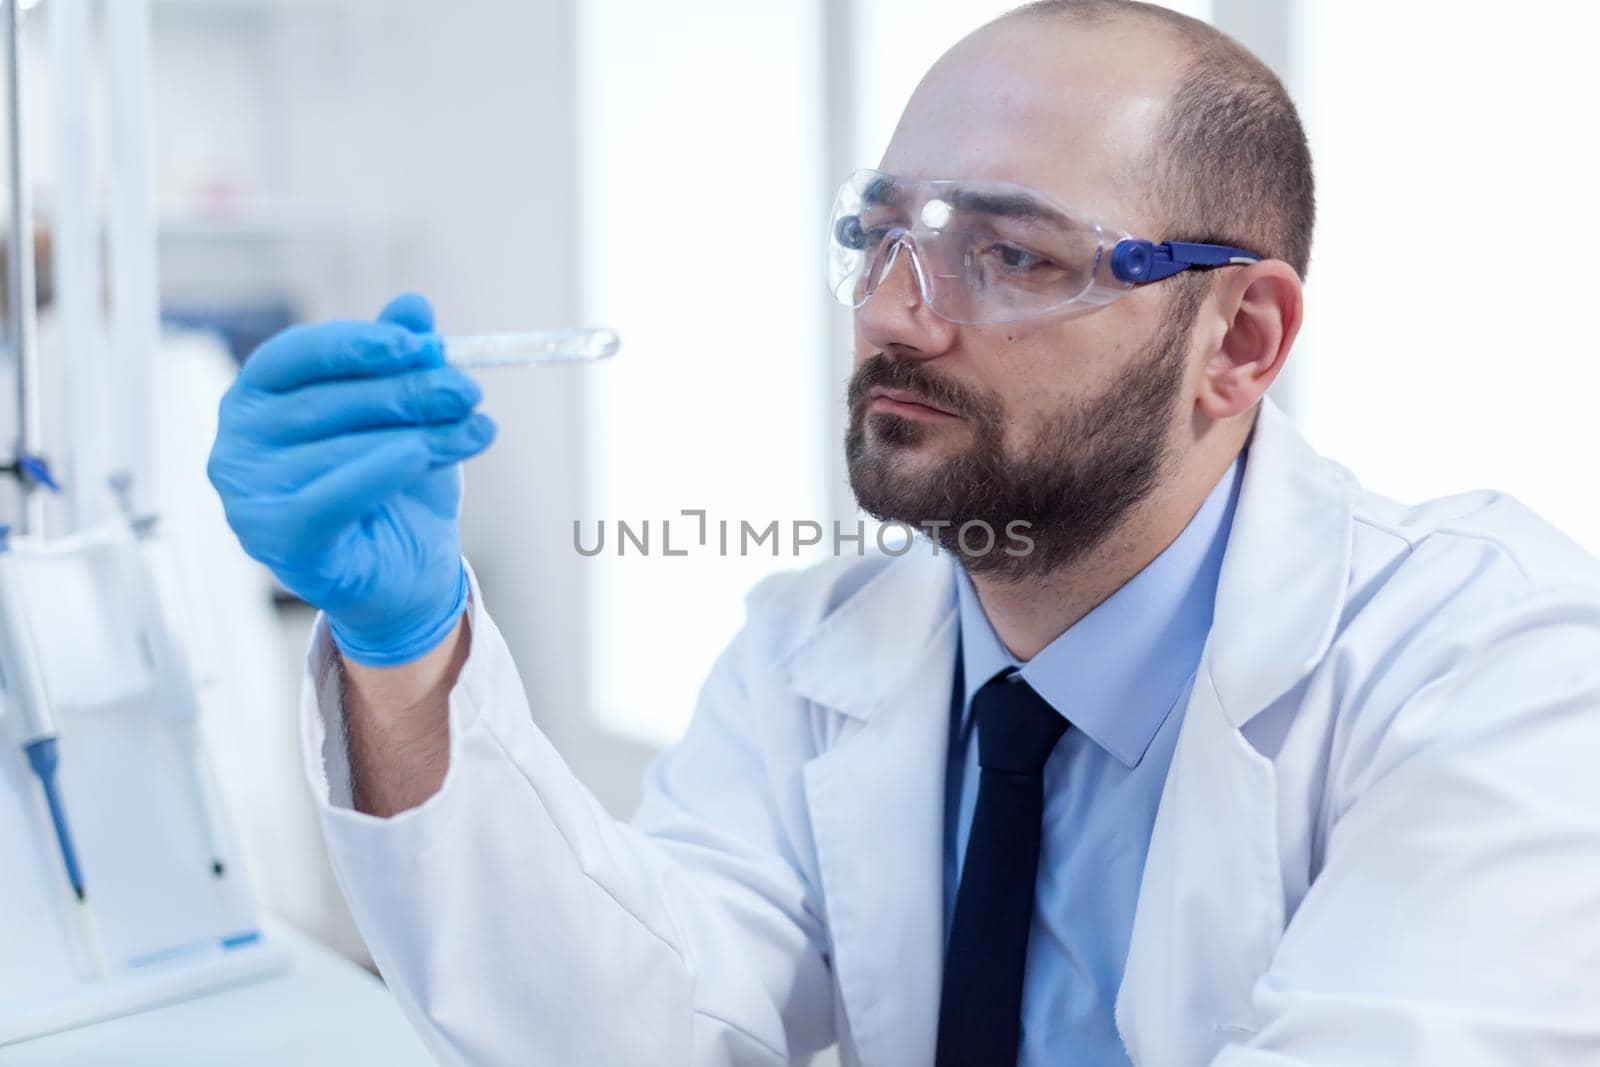 Chemist scientist holds test tube of glass in his hand for medicine experiment. Researcher in biotechnology sterile lab holding analysis in tube wearing gloves and protection glasses.